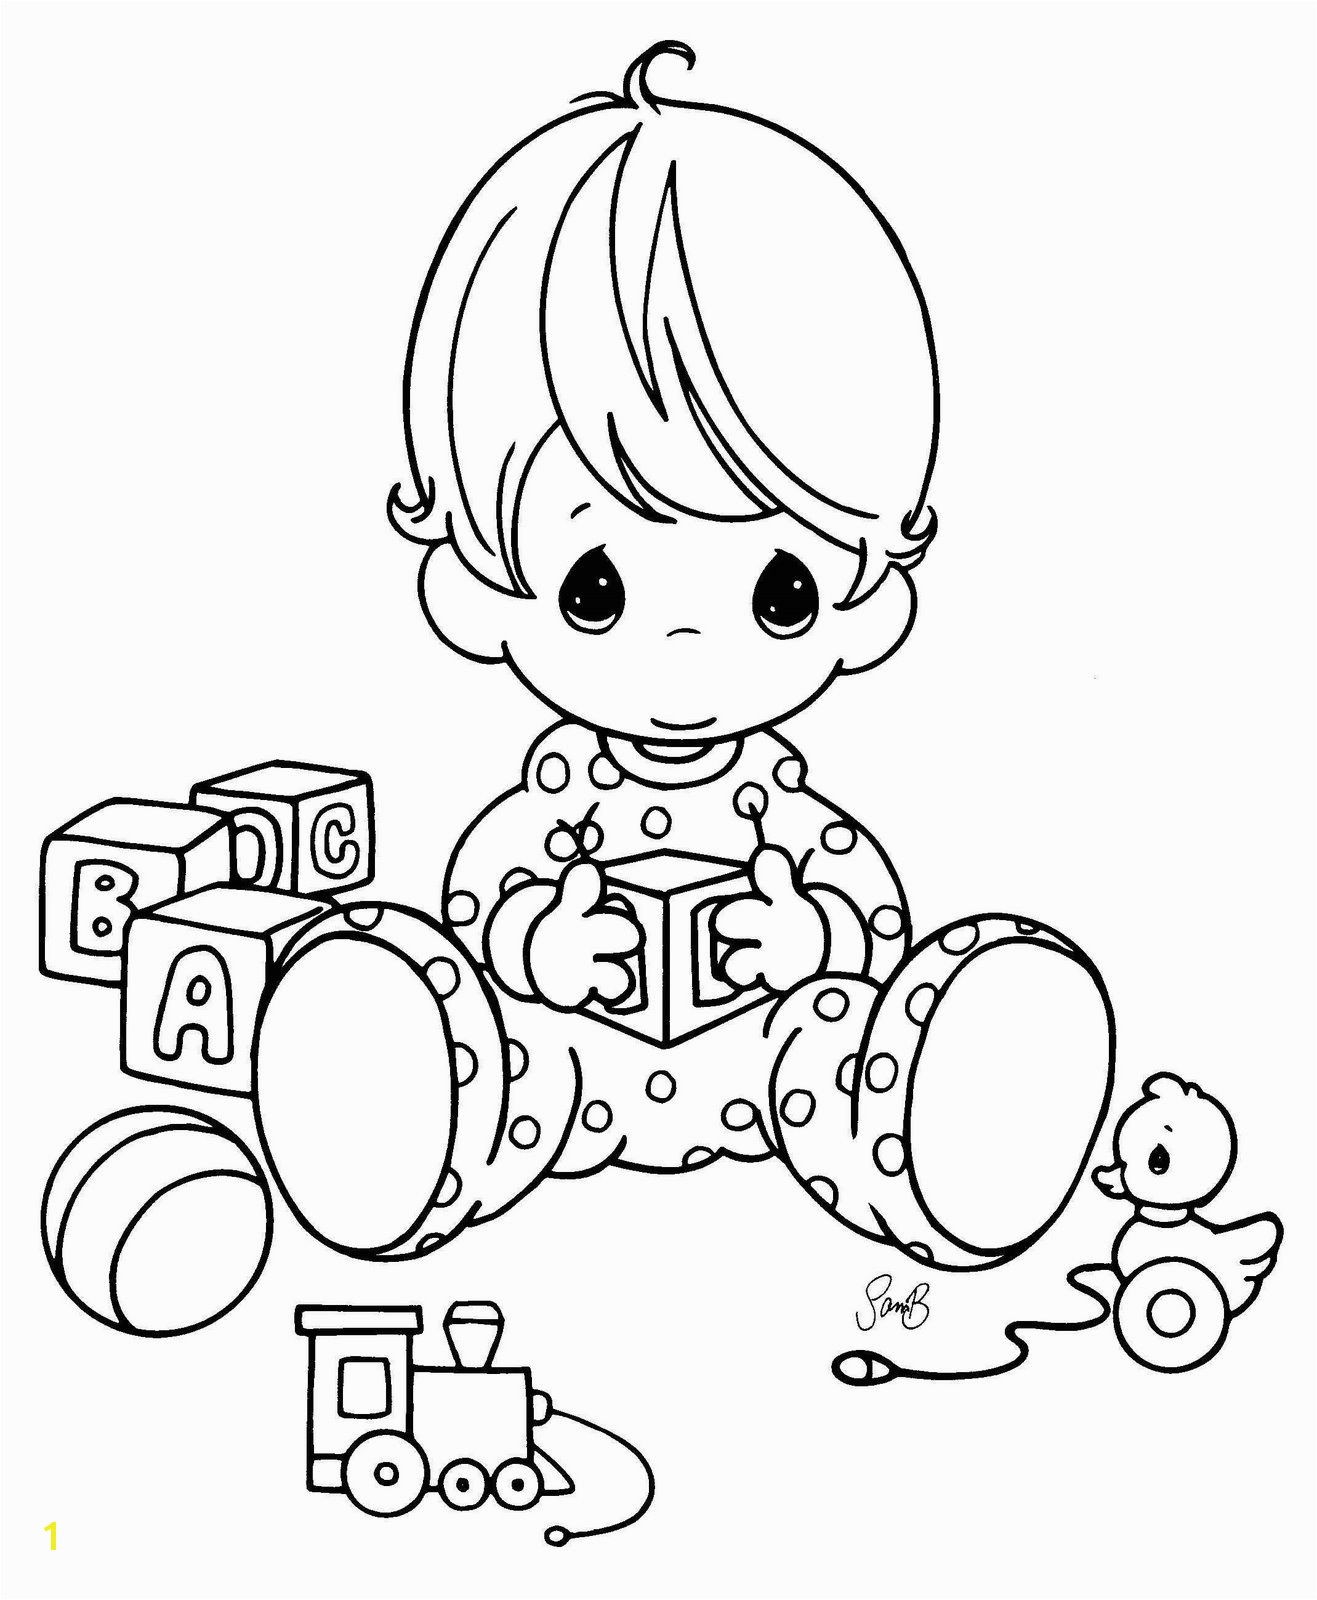 Precious Moments Coloring Pages Pdf Free Printable Baby Coloring Pages for Kids to Print Coloring Image